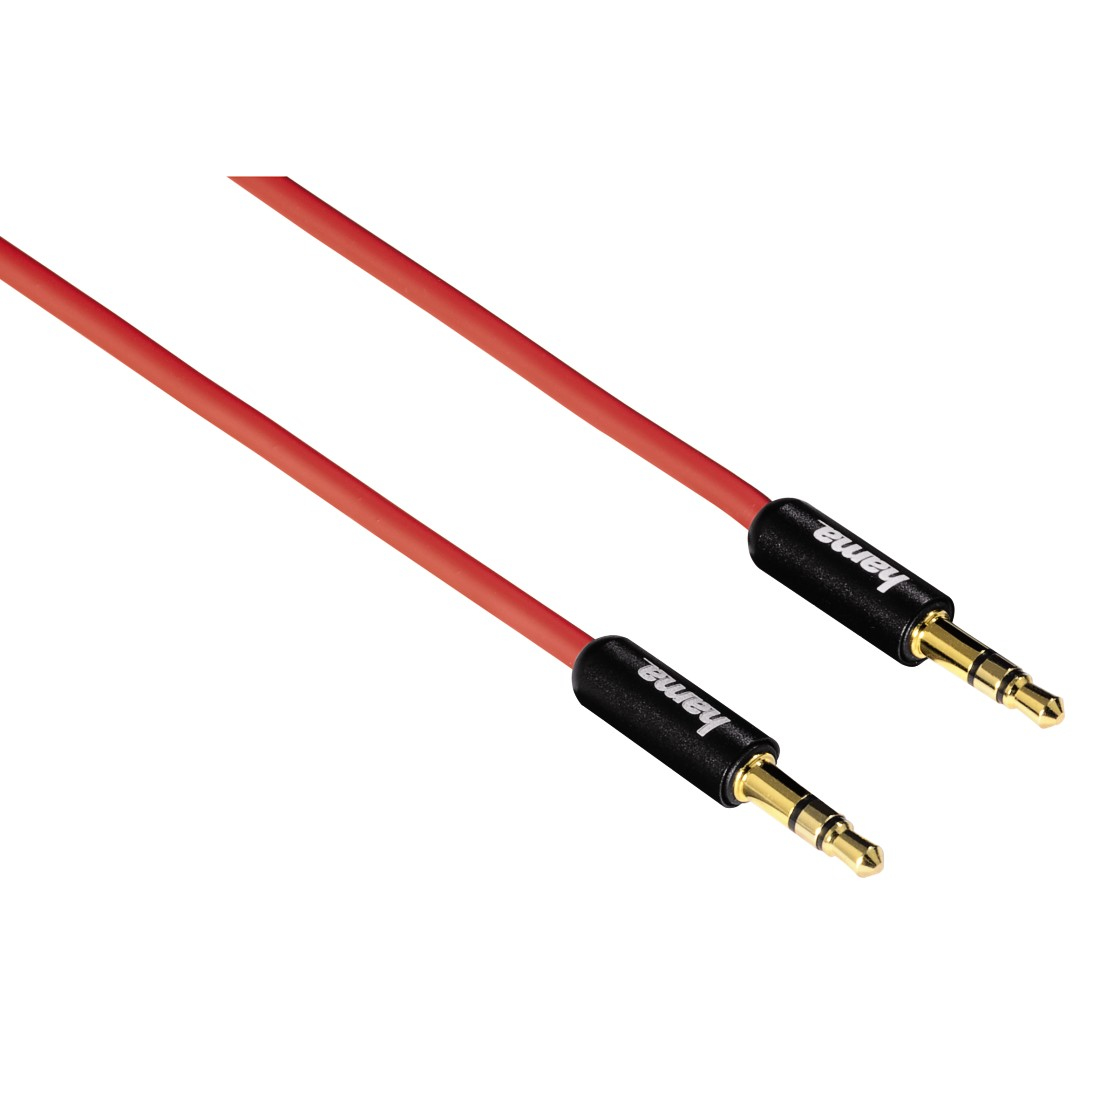 Hama Video Connection Cable, 4-pin 3.5 mm Jack Plug-3 RCA (phono) Plugs,  1.5m